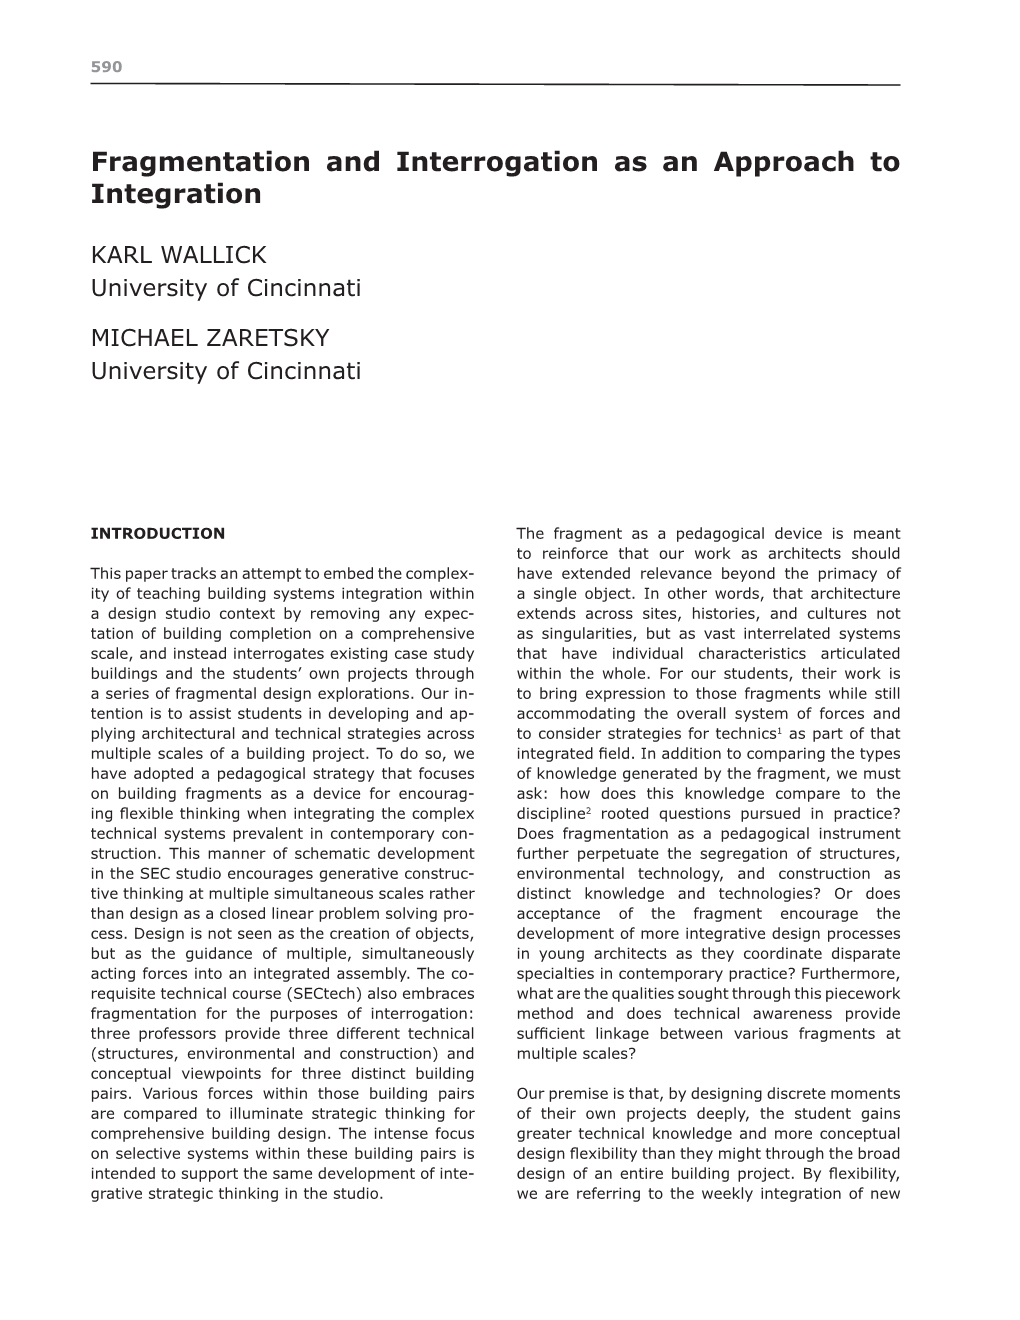 Fragmentation and Interrogation As an Approach to Integration